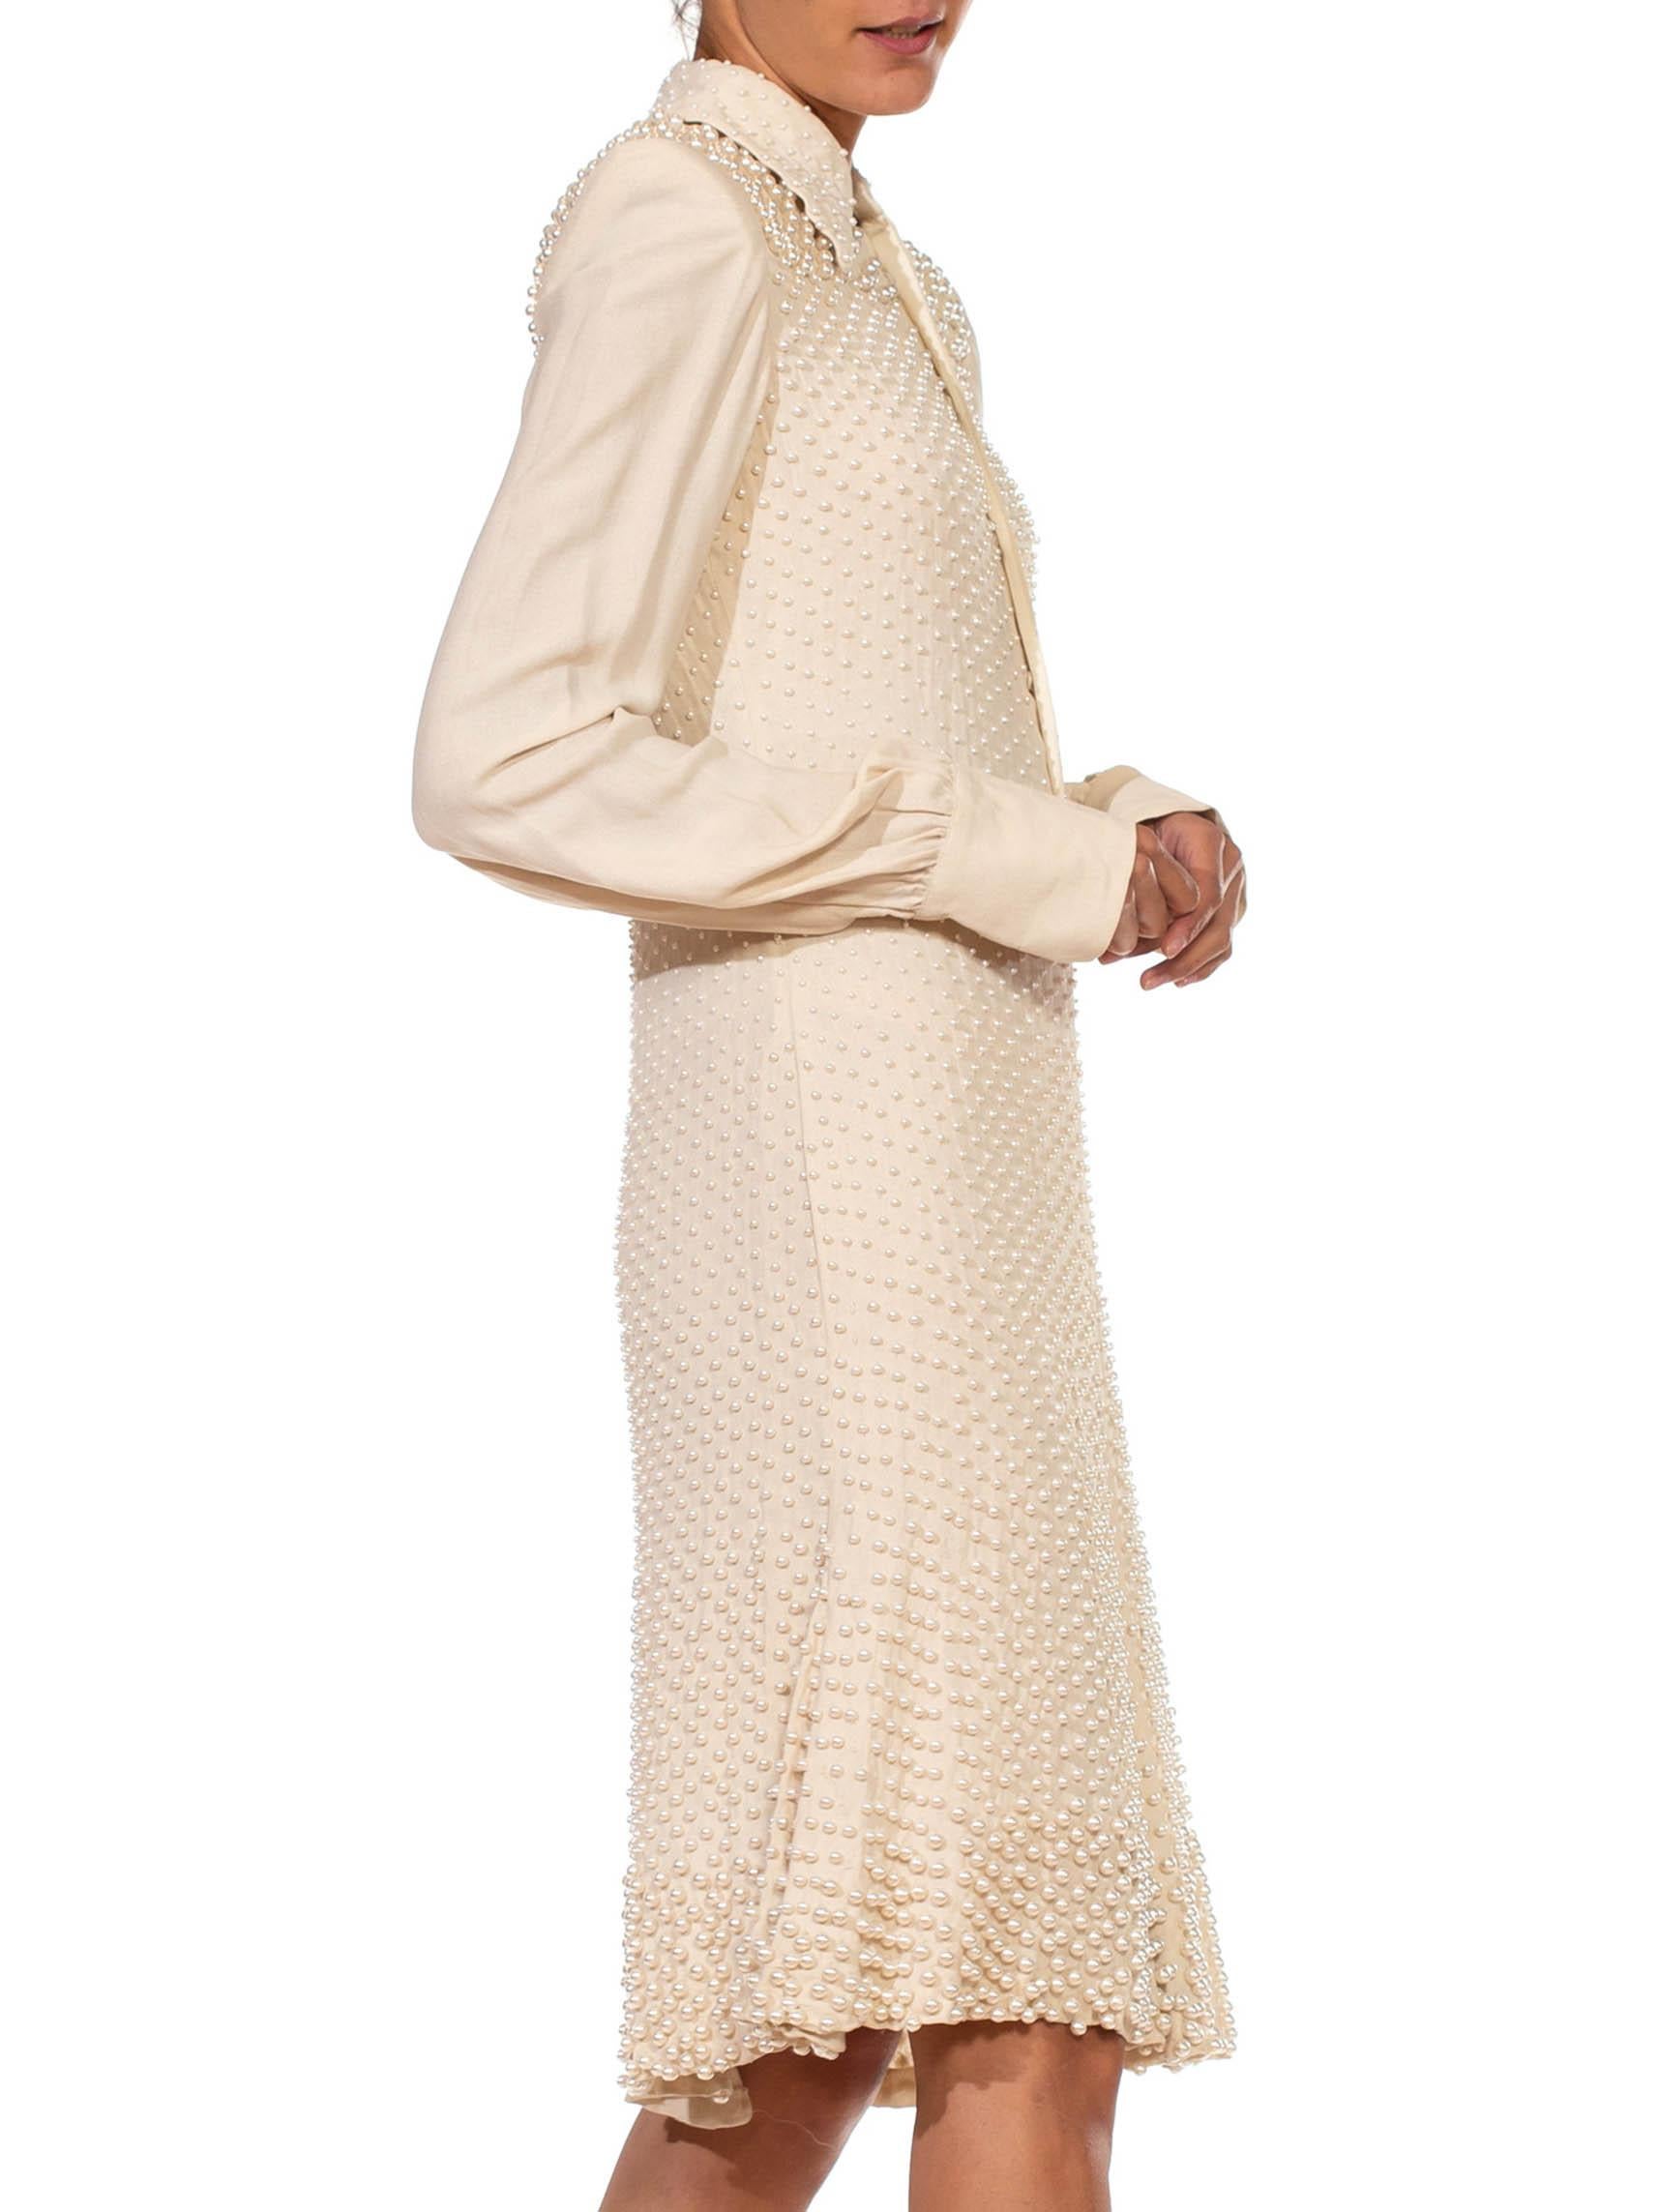 Beige 2000S JEAN PAUL GAULTIER Cream Silk Long Sleeved Cocktail Dress Covered In Pear For Sale